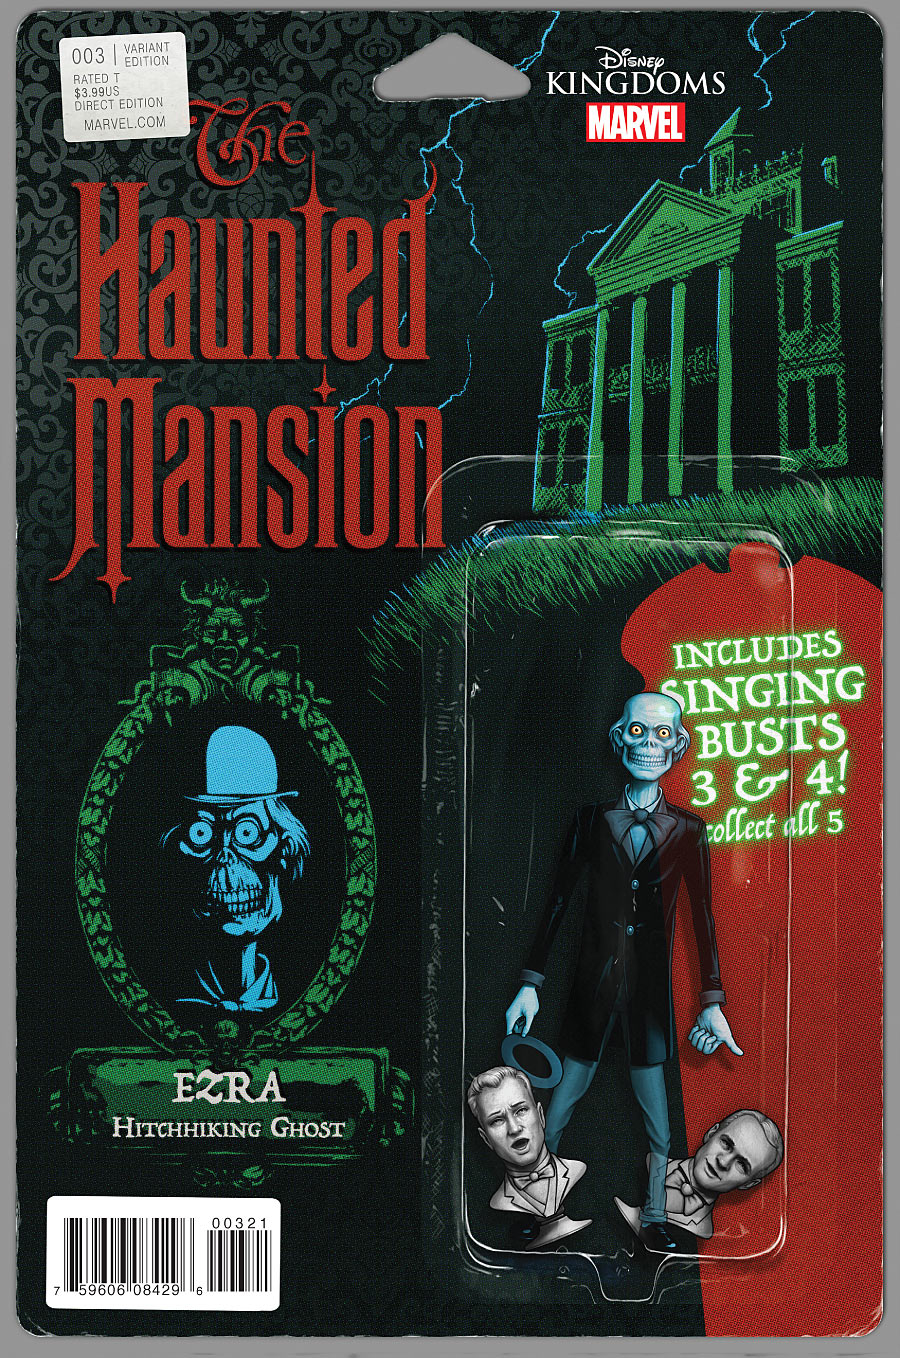 HAUNTED MANSION #3 (OF 5) CHRISTOPHER ACTION FIGURE VAR